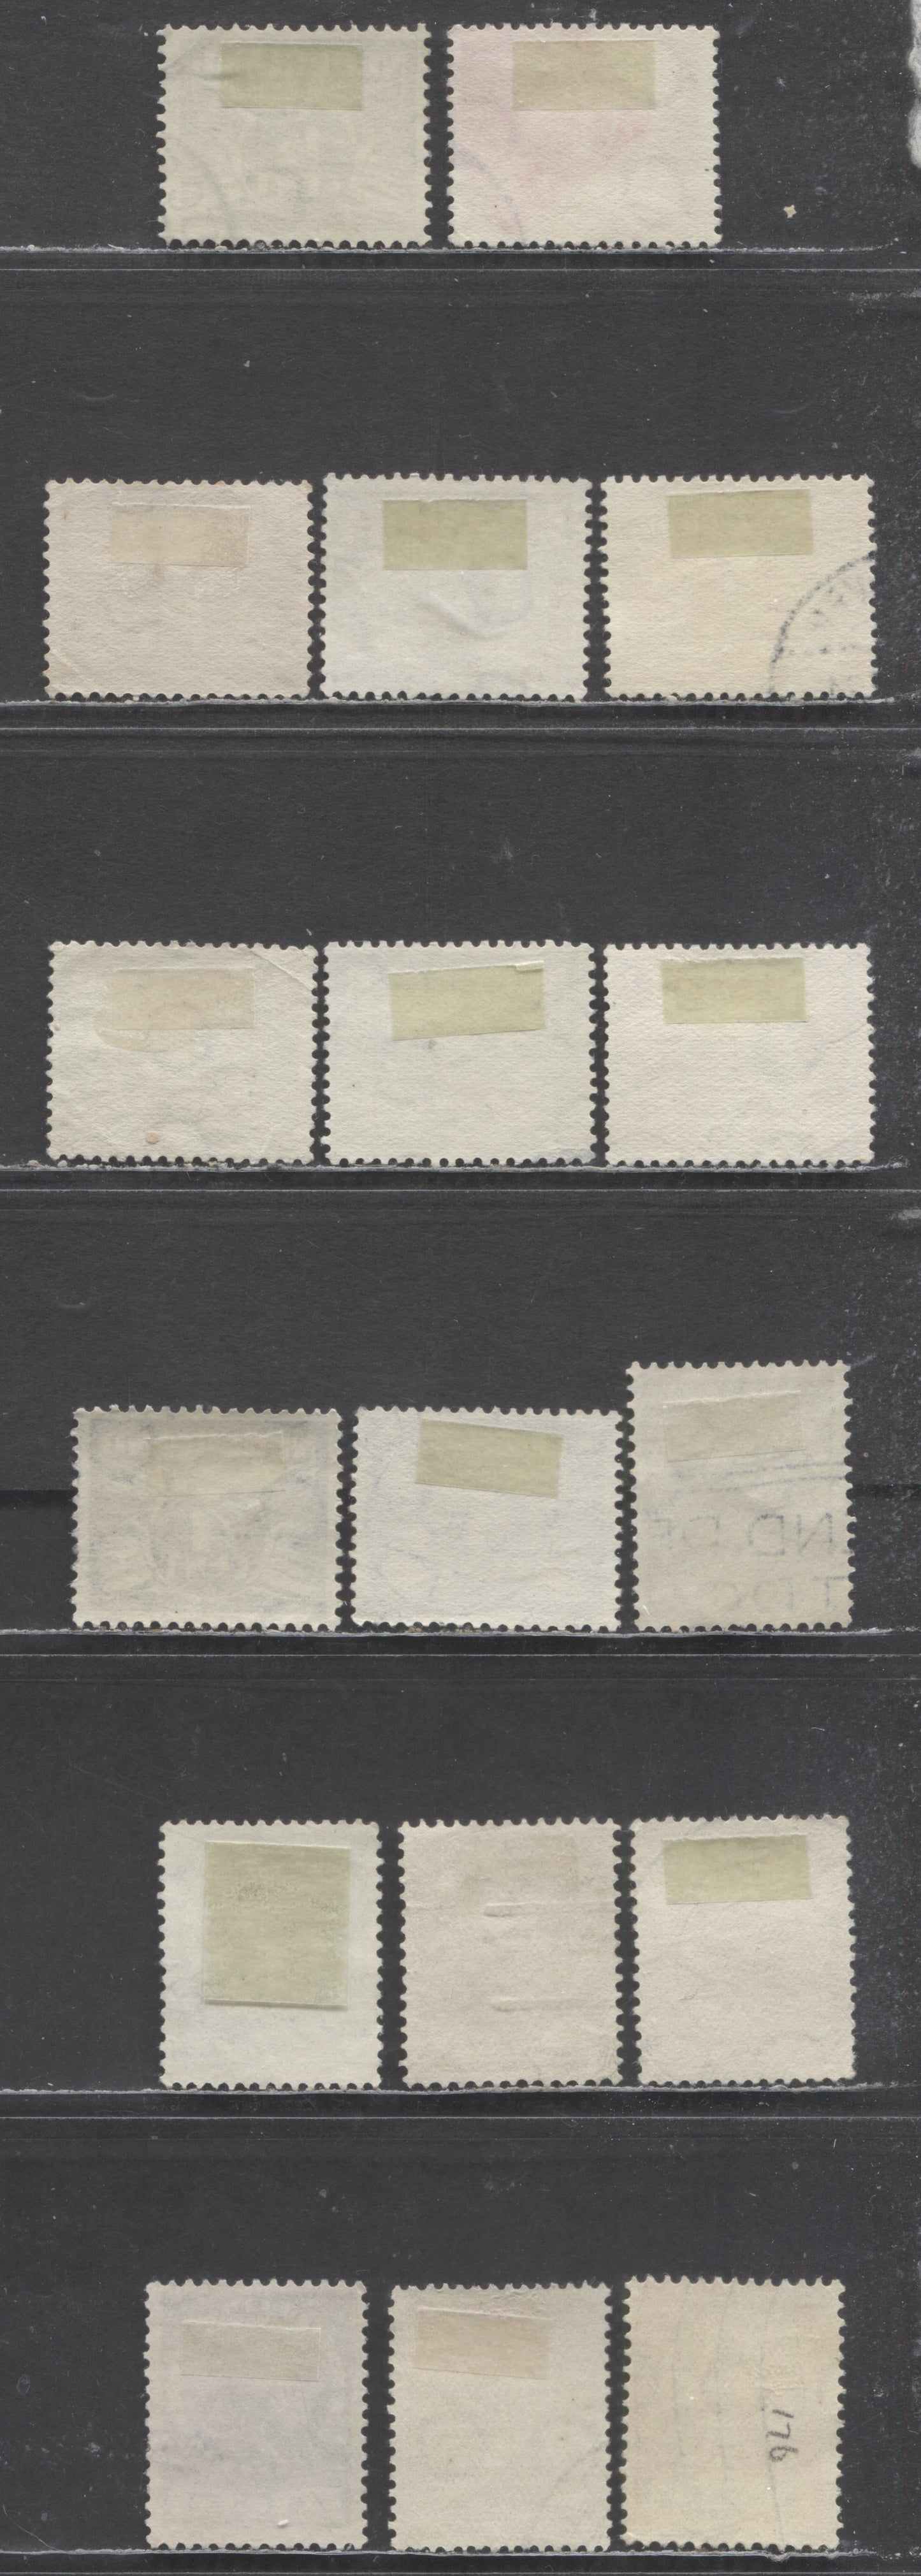 Lot 98 Netherlands SC#164-176 1926 Queen Wilhelmina & Gull Definitives, Includes Some Shade Varieties, Multiple Circles Wmk, 17 Fine/Very Fine Used Singles, Click on Listing to See ALL Pictures, Estimated Value $15